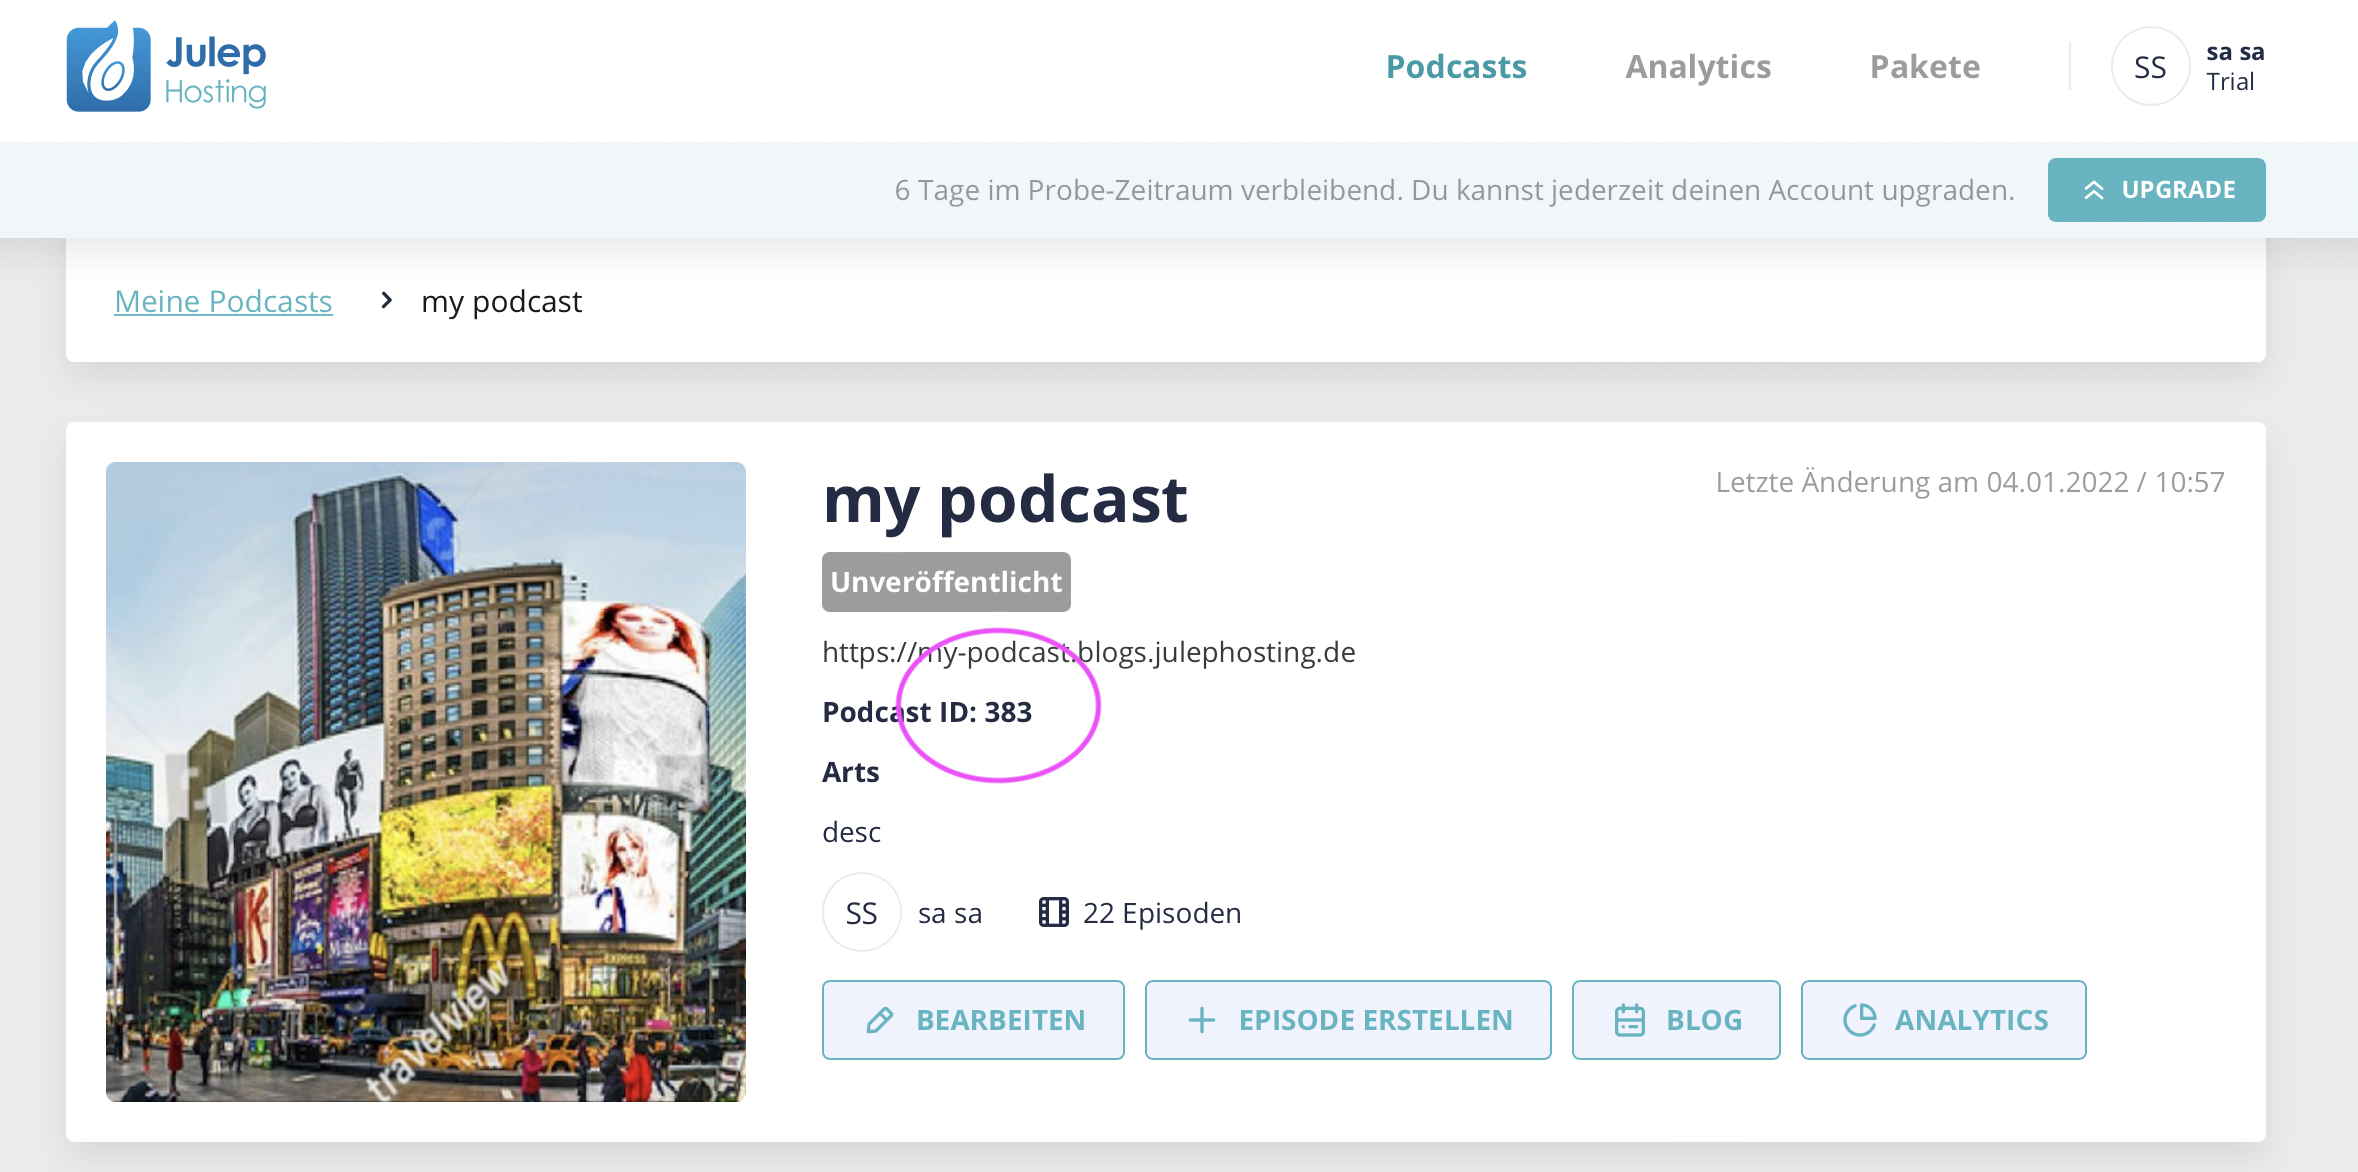 Finding your podcast id is quite easy